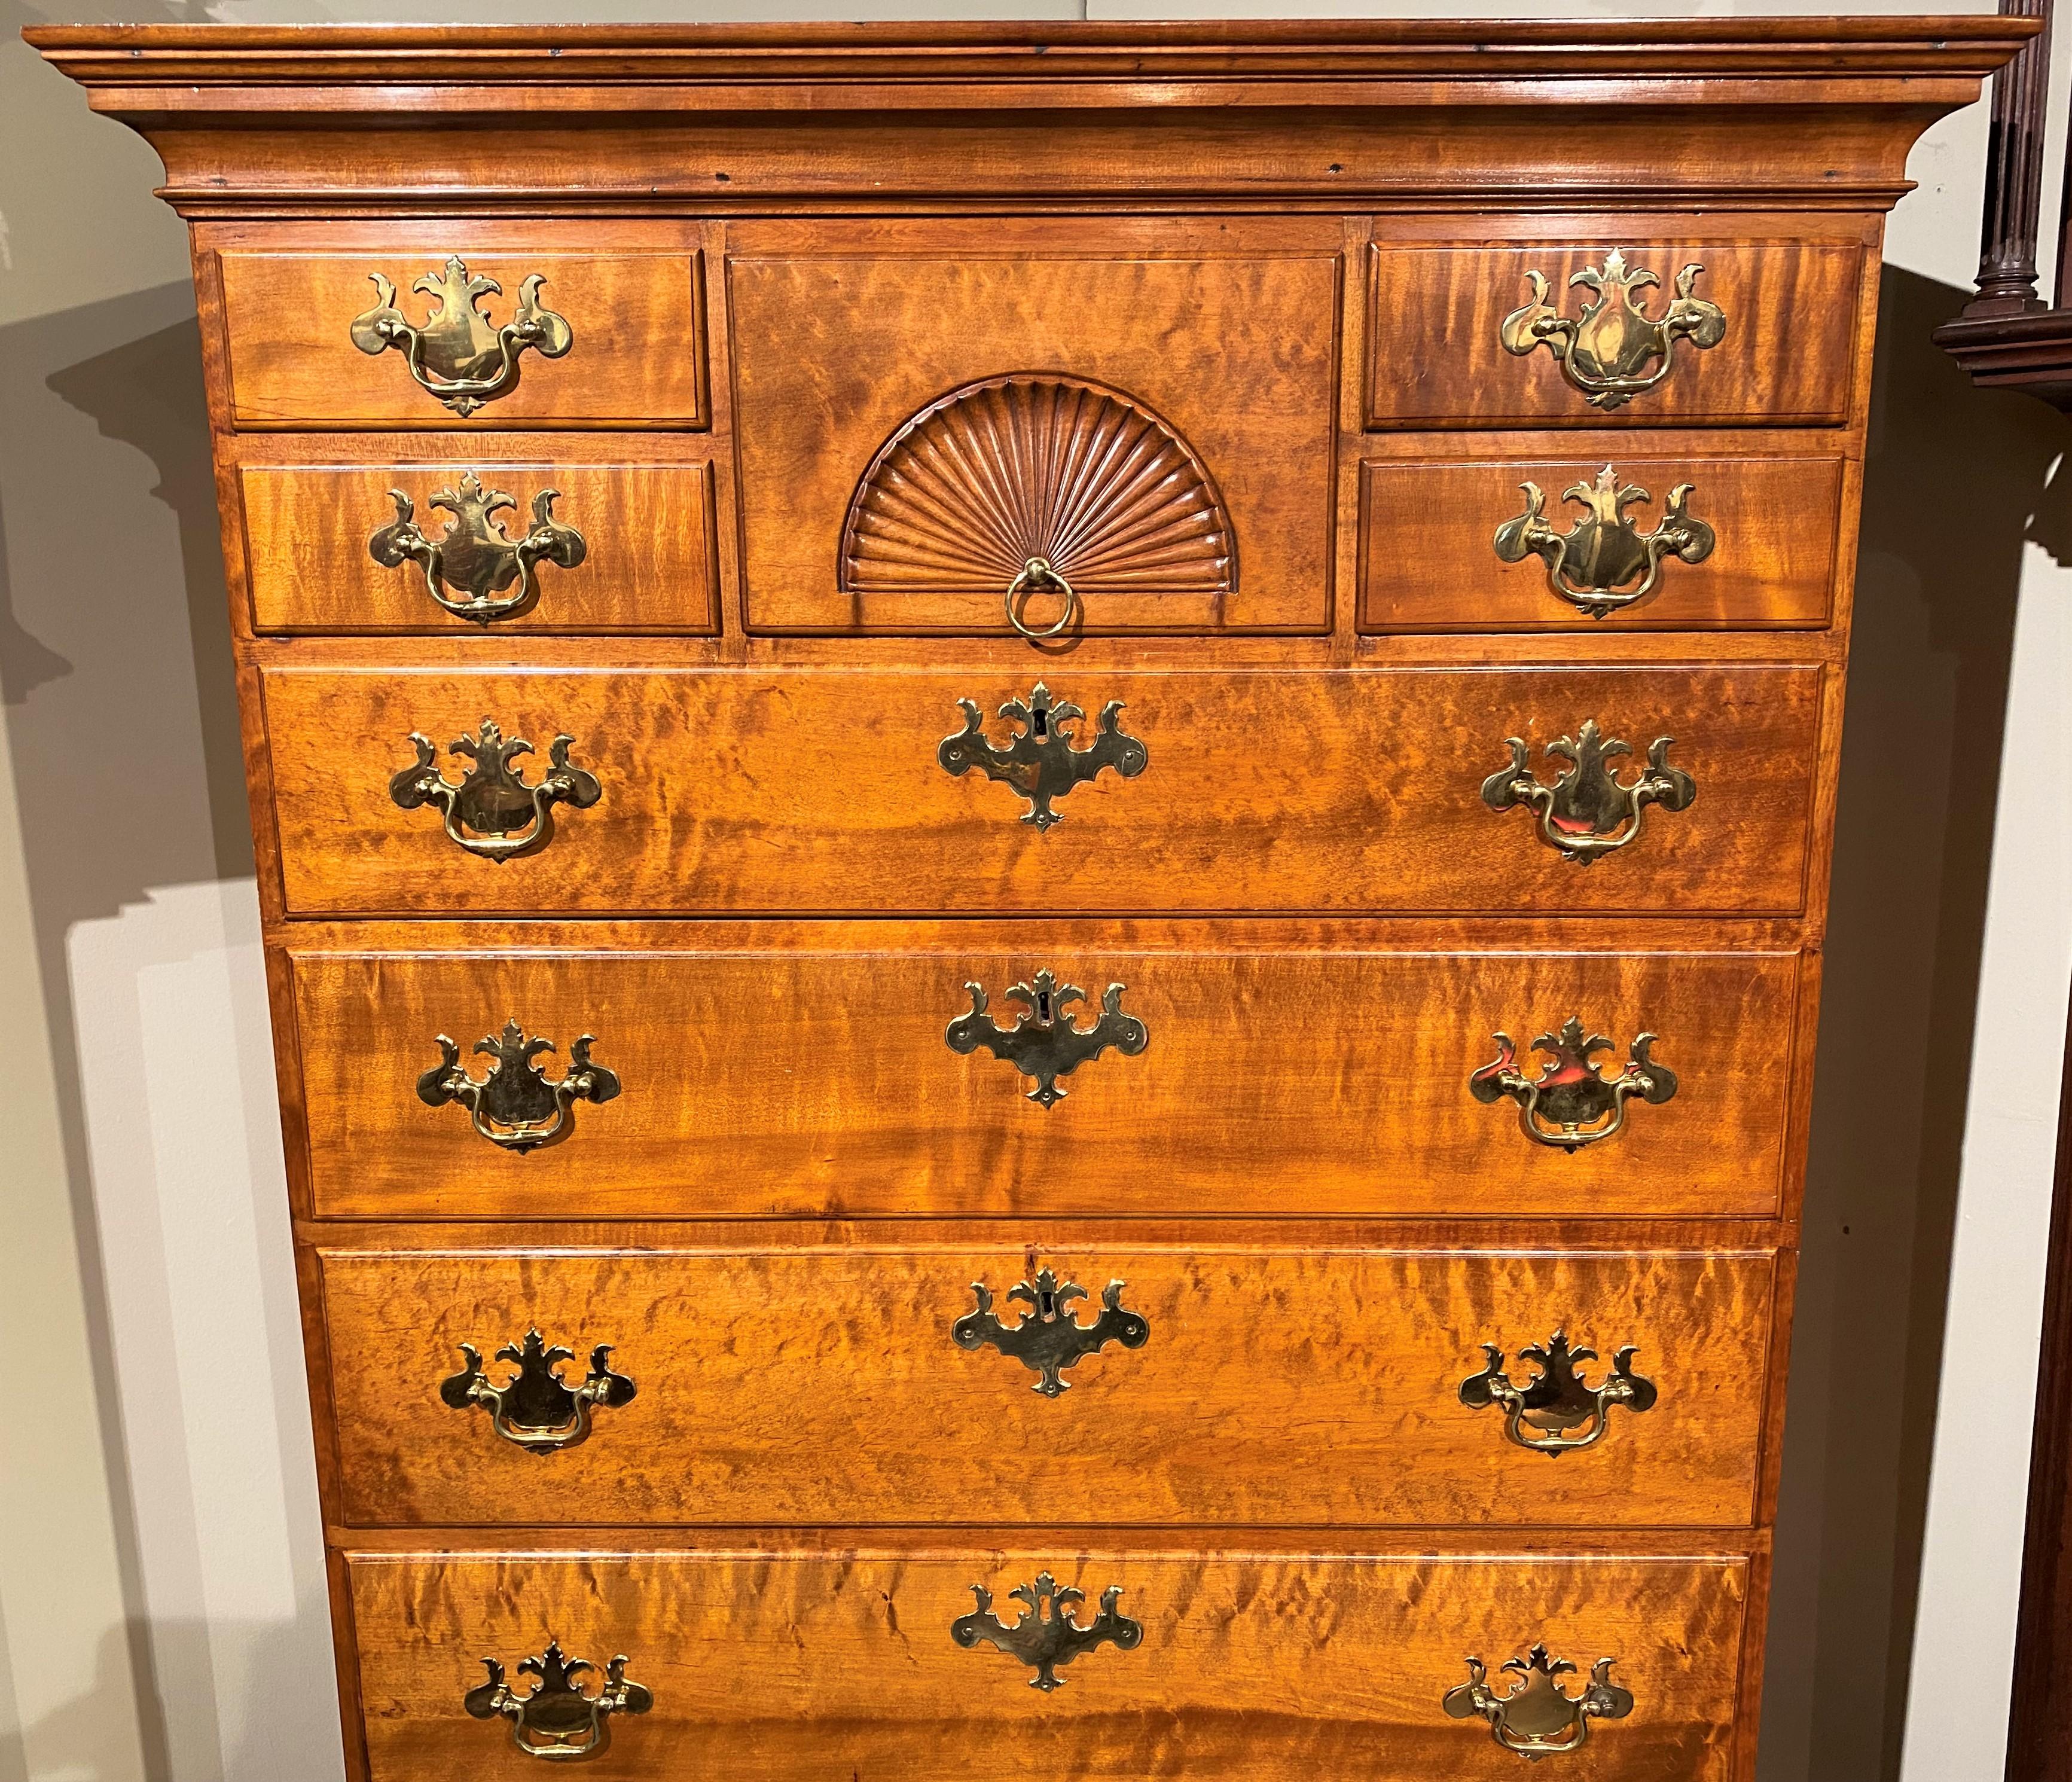 A splendid New Hampshire Dunlap School Chippendale chest on chest, its upper case featuring a molded cornice surmounting a central drawer with radial fan carving flanked by four small fitted drawers, over four graduated long drawers, over a lower